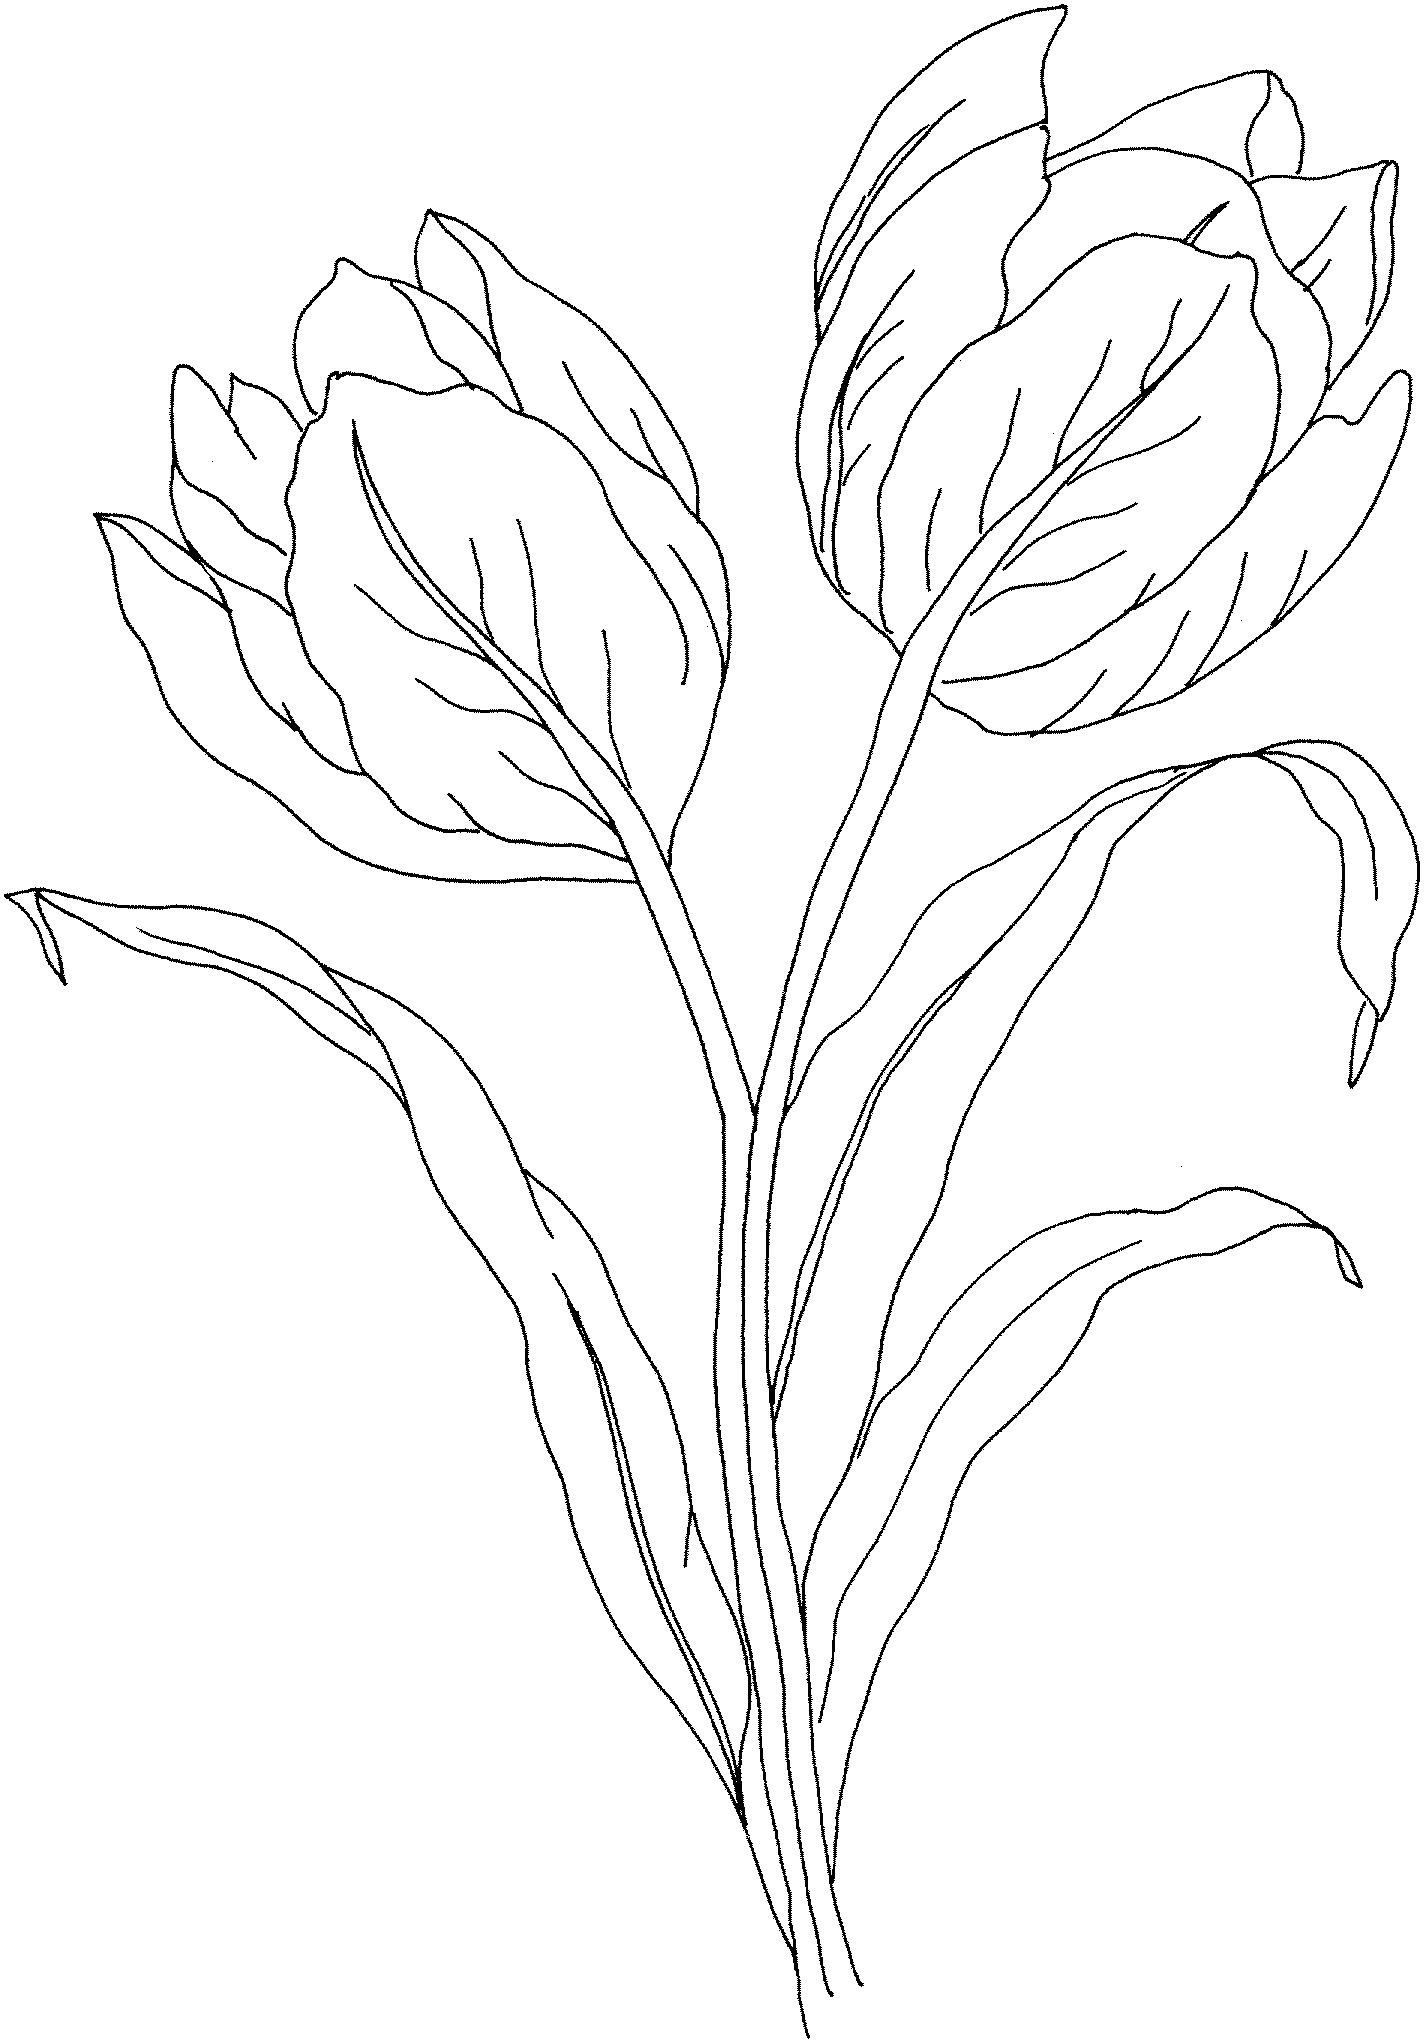 570 Colouring Pages Tulip Flowers  Images